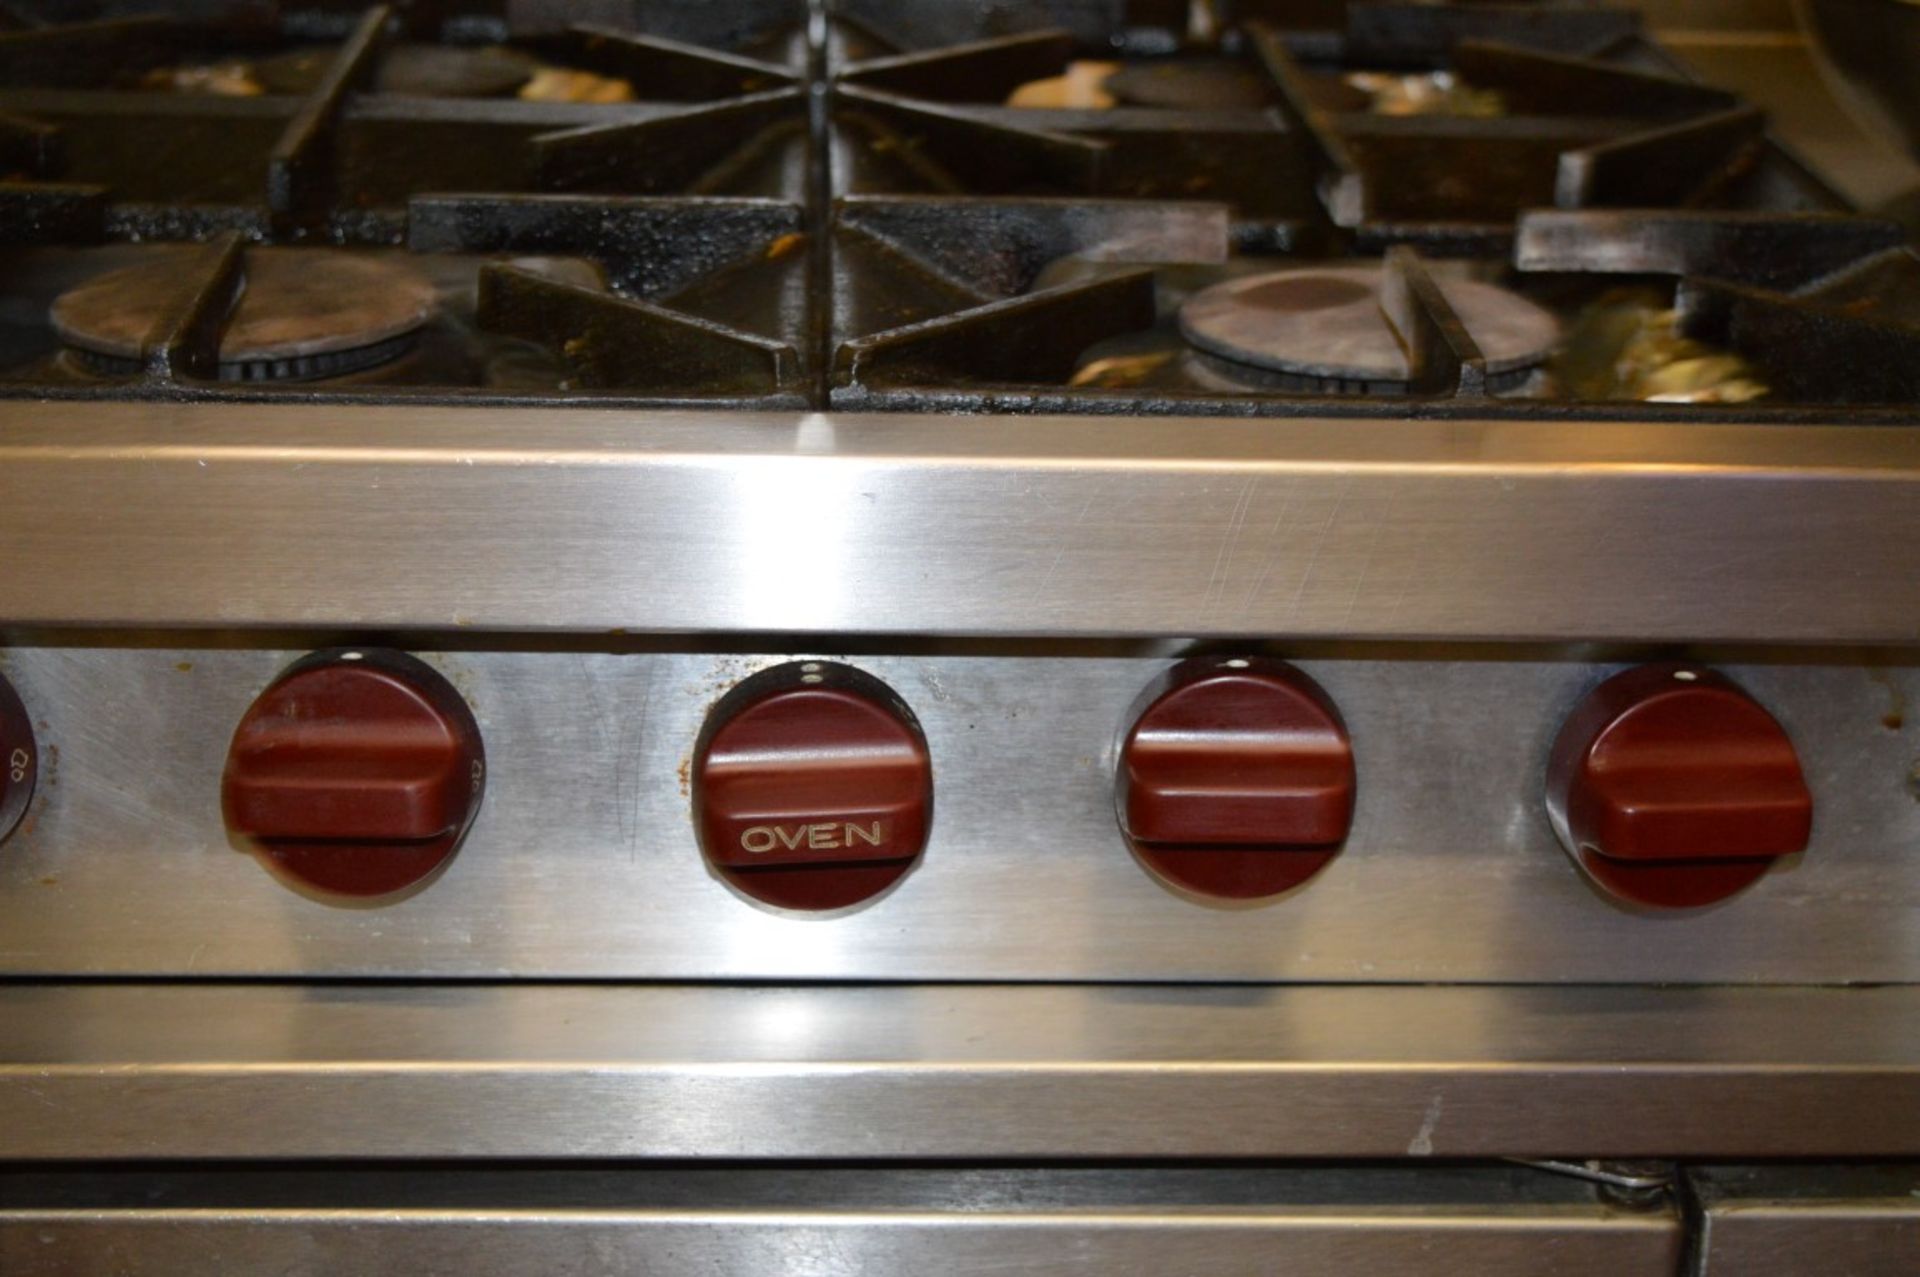 1 x Falcon 6 Burner Commercial Gas Cooker and Oven - Stainless Steel Commercial Kitchen - Image 2 of 6